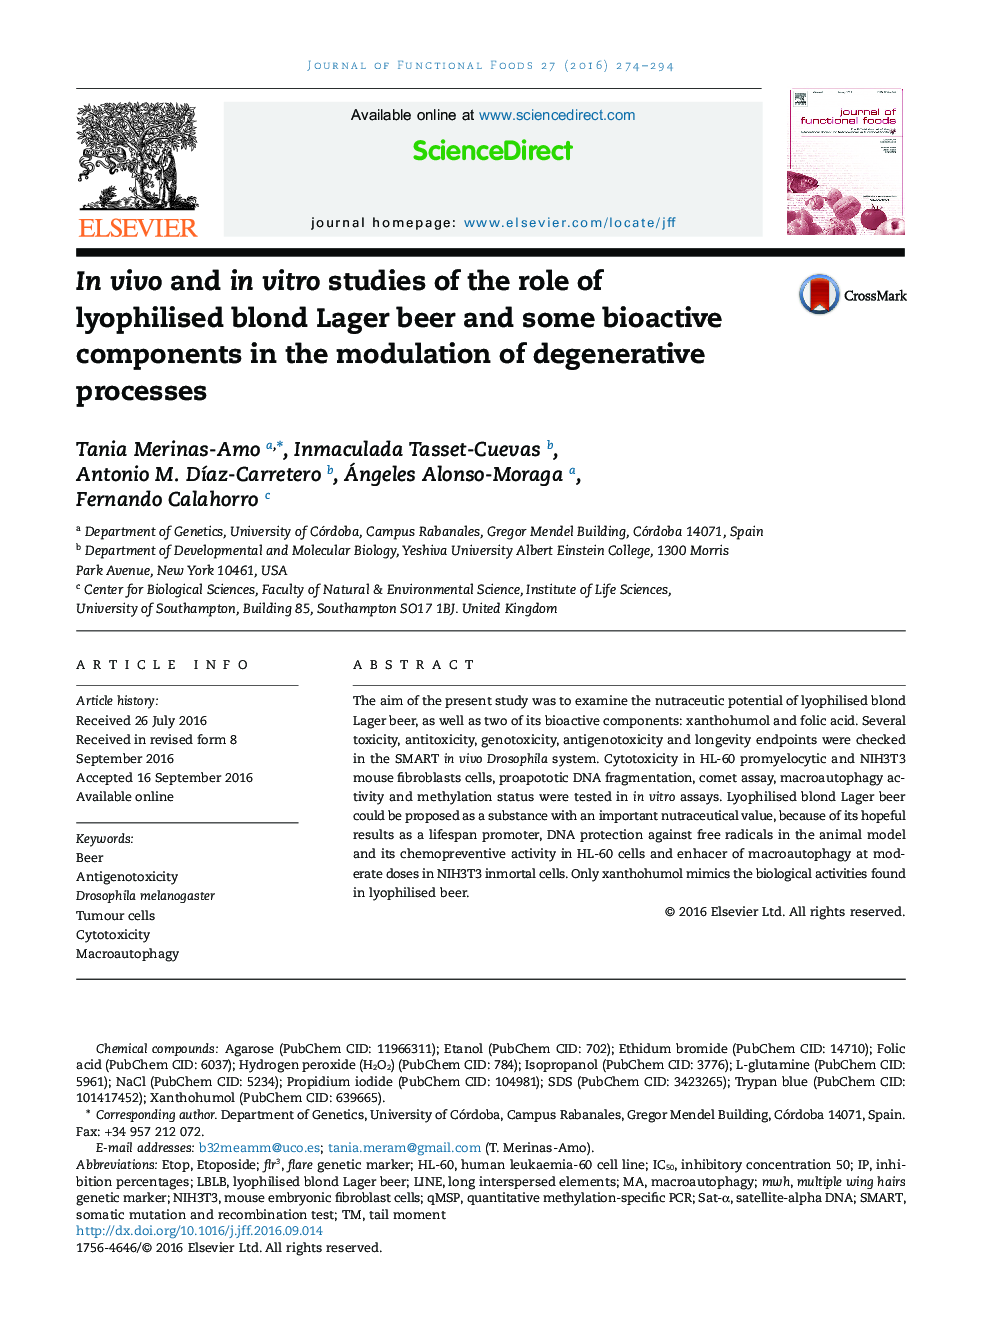 In vivo and in vitro studies of the role of lyophilised blond Lager beer and some bioactive components in the modulation of degenerative processes